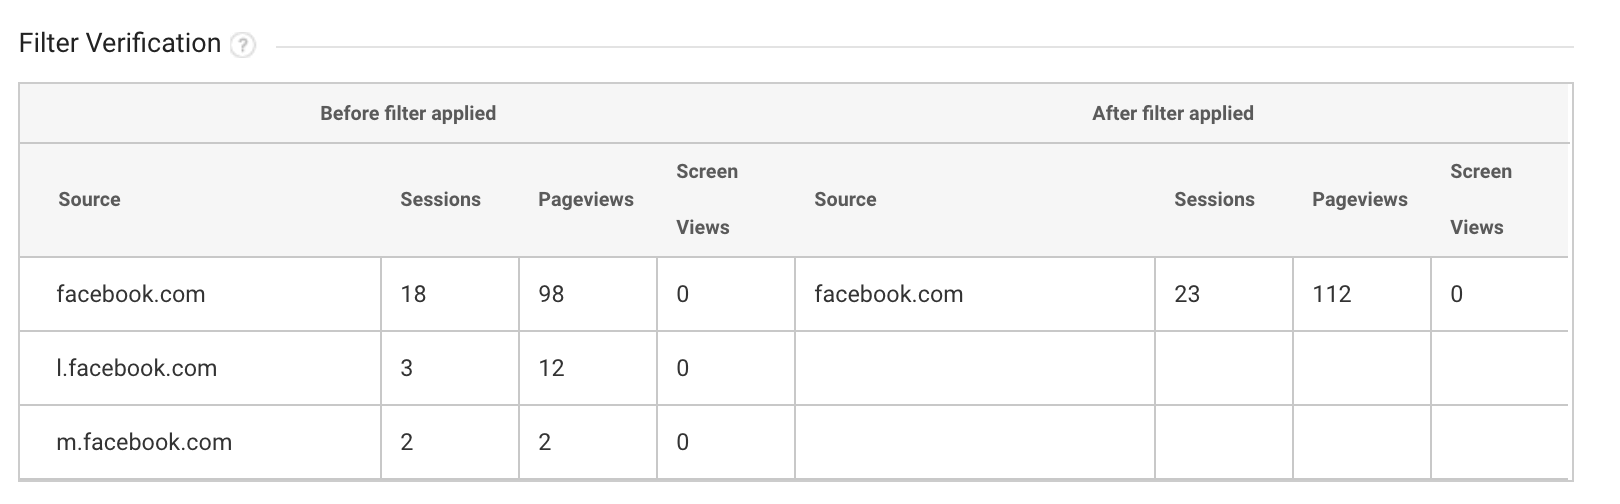 How to Fix m/lm/l.facebook.com in Google Analytics: Step 6: Filter verification